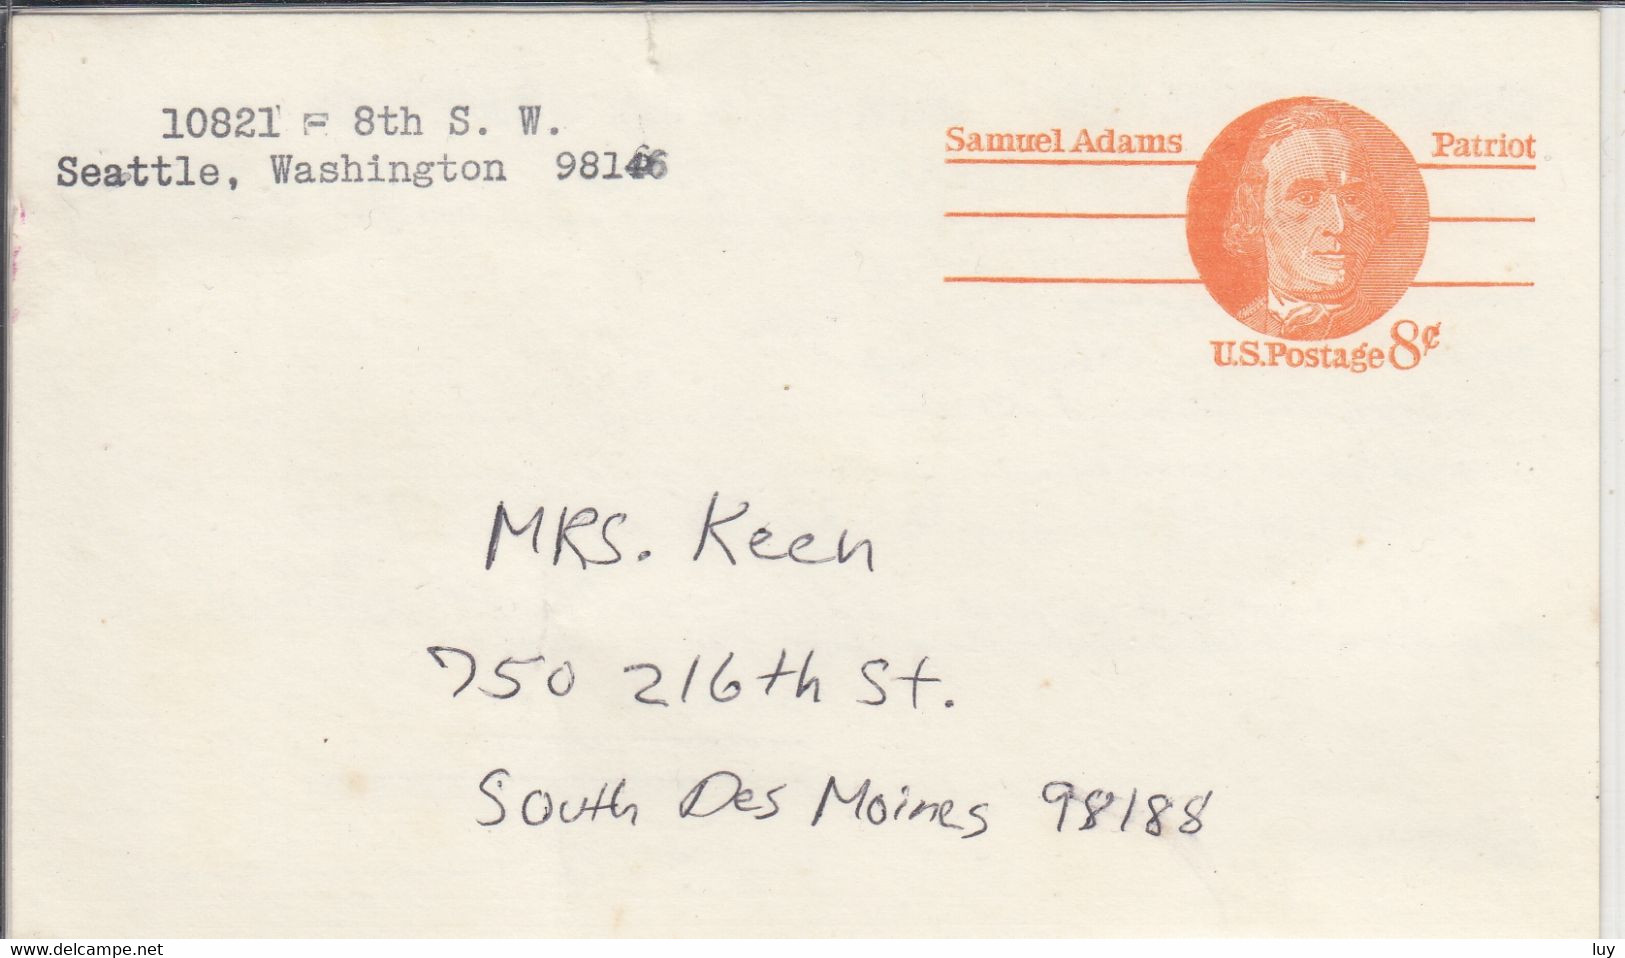 Appointment Postal Card, Entier Card, Issued From Seattle-King, Dept. Of Public Health, Postal Stationary, Scott UX66 - 1961-80